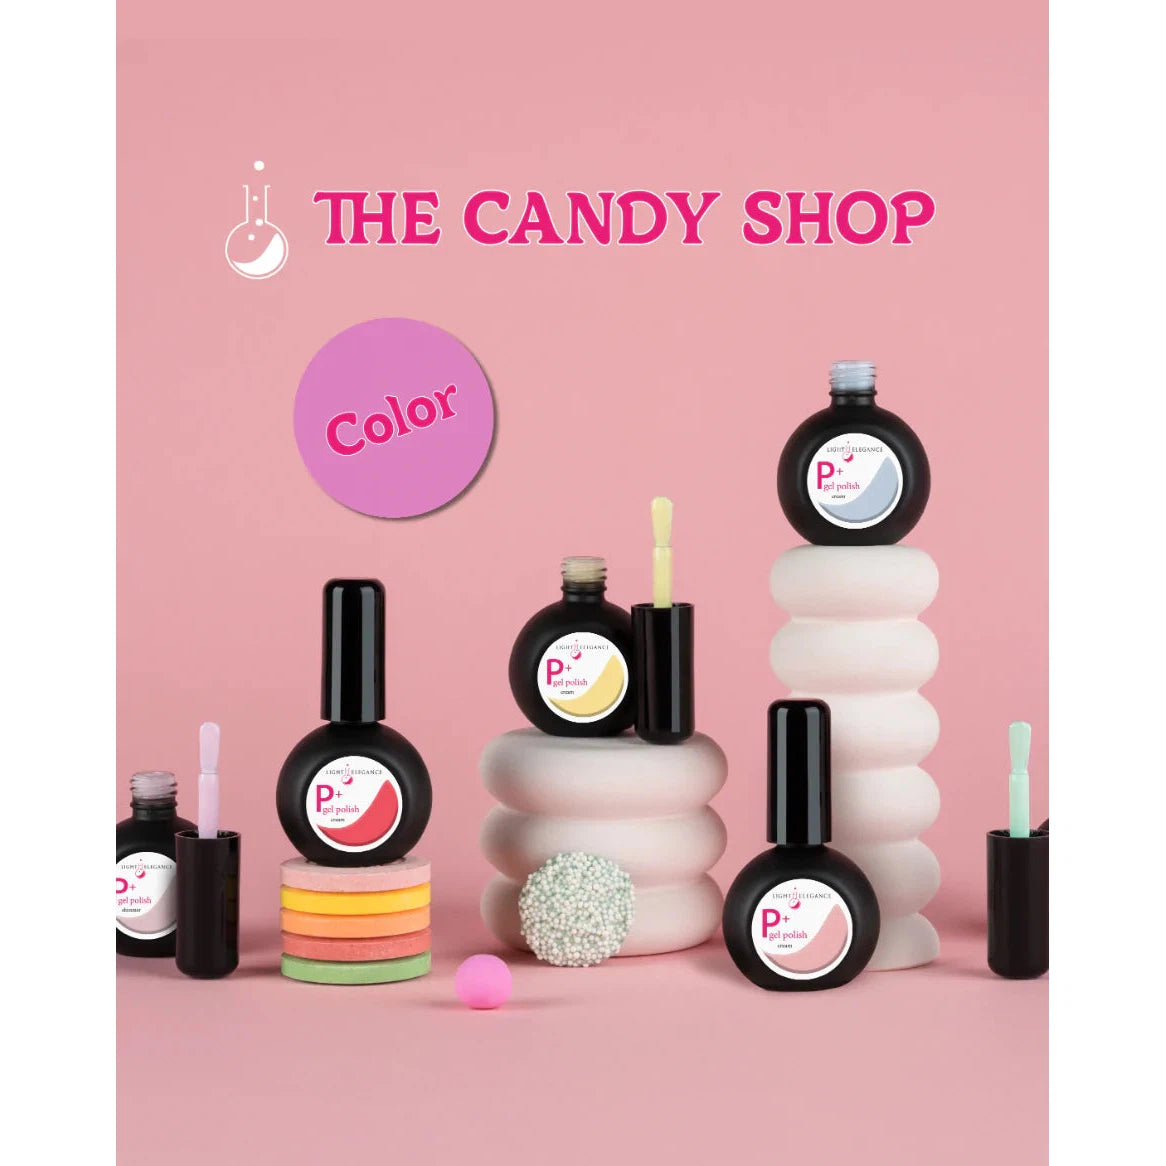 The Candy Shop Collection, P+ GEL POLISH PACK: 15 ml